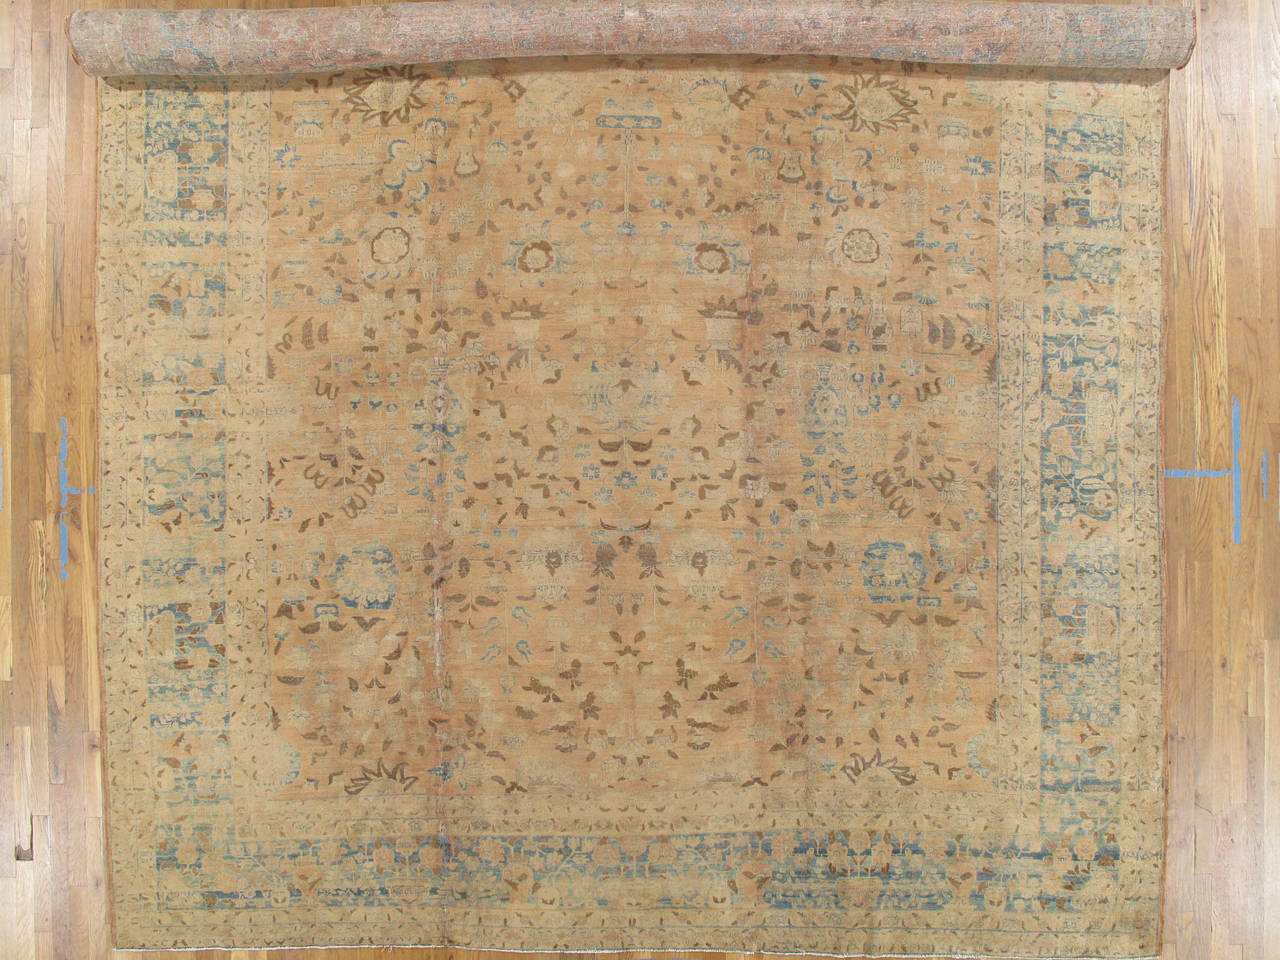 19th Century Antique Tabriz Carpet, Handmade Persian Rug in Floral Gold, Light Blue, Taupe For Sale